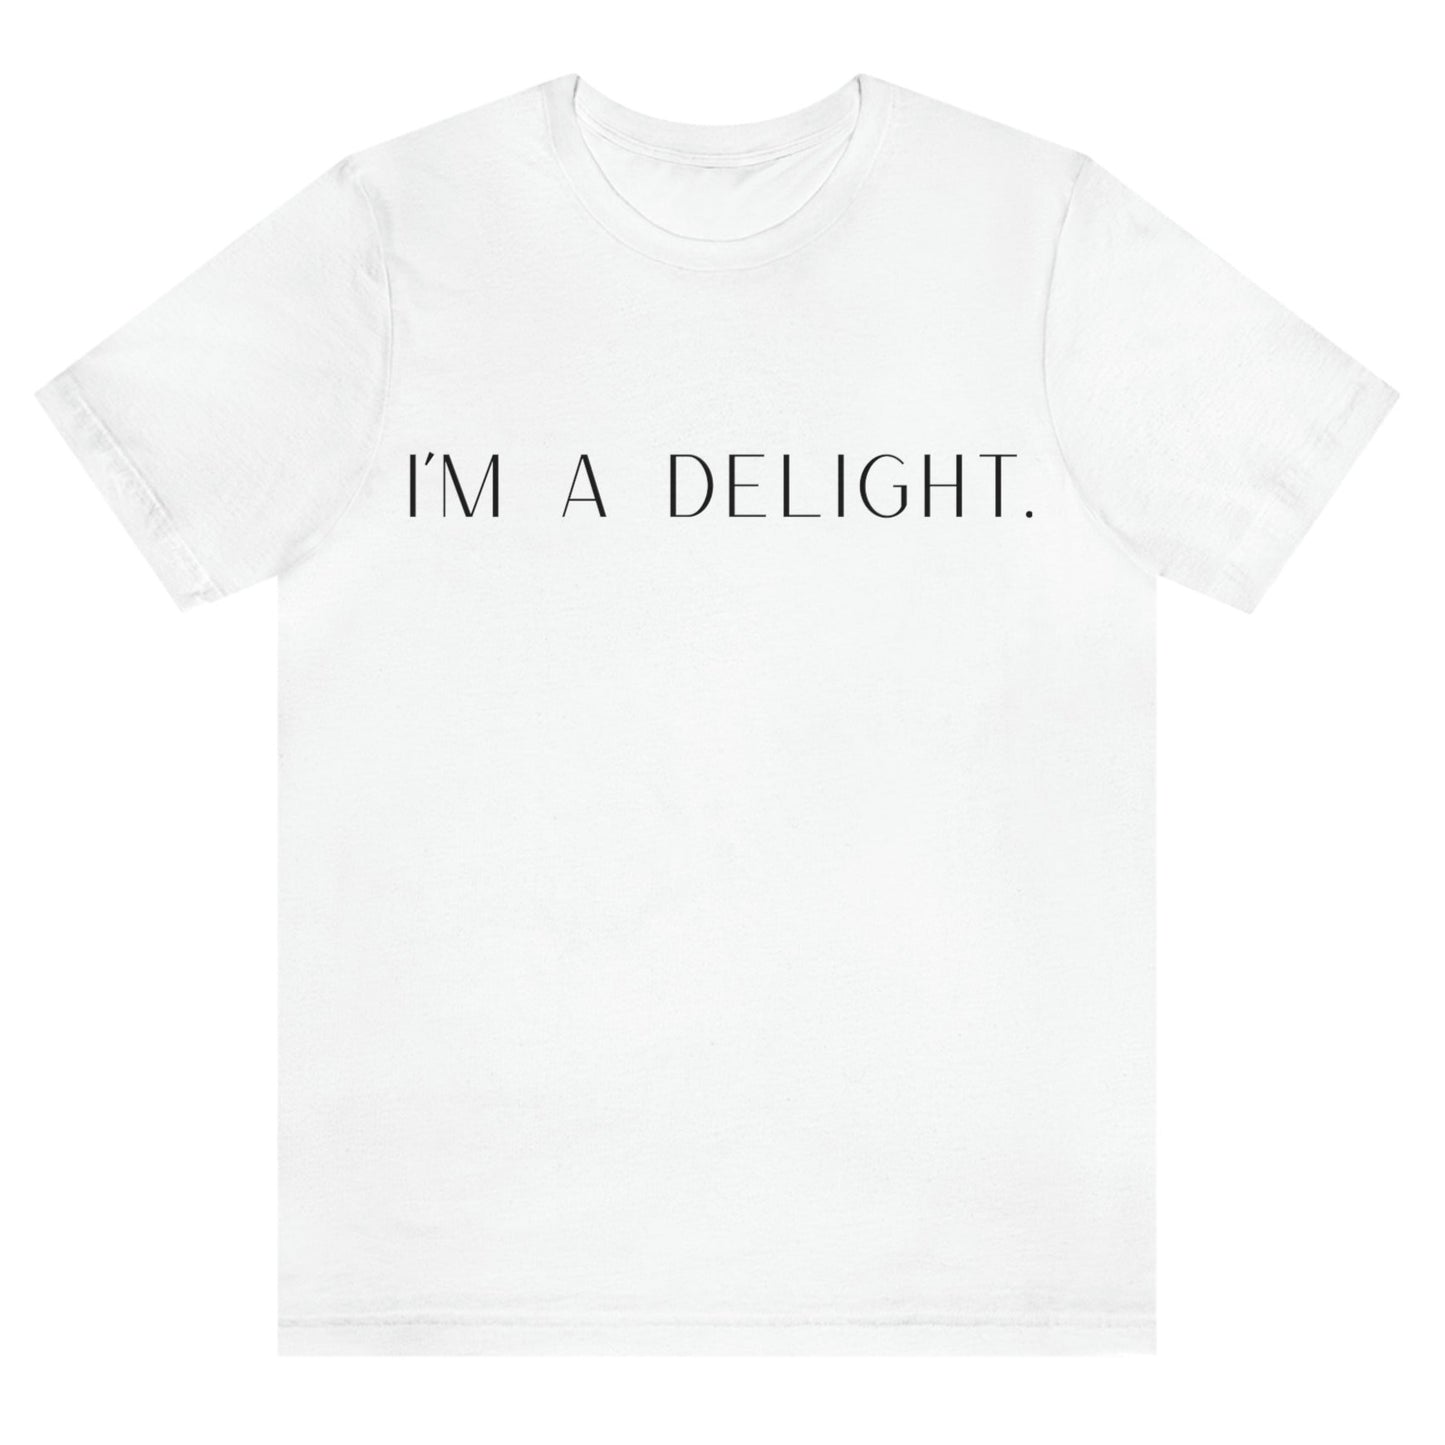 im-a-delight-white-t-shirt-womens-funny-sarcastic